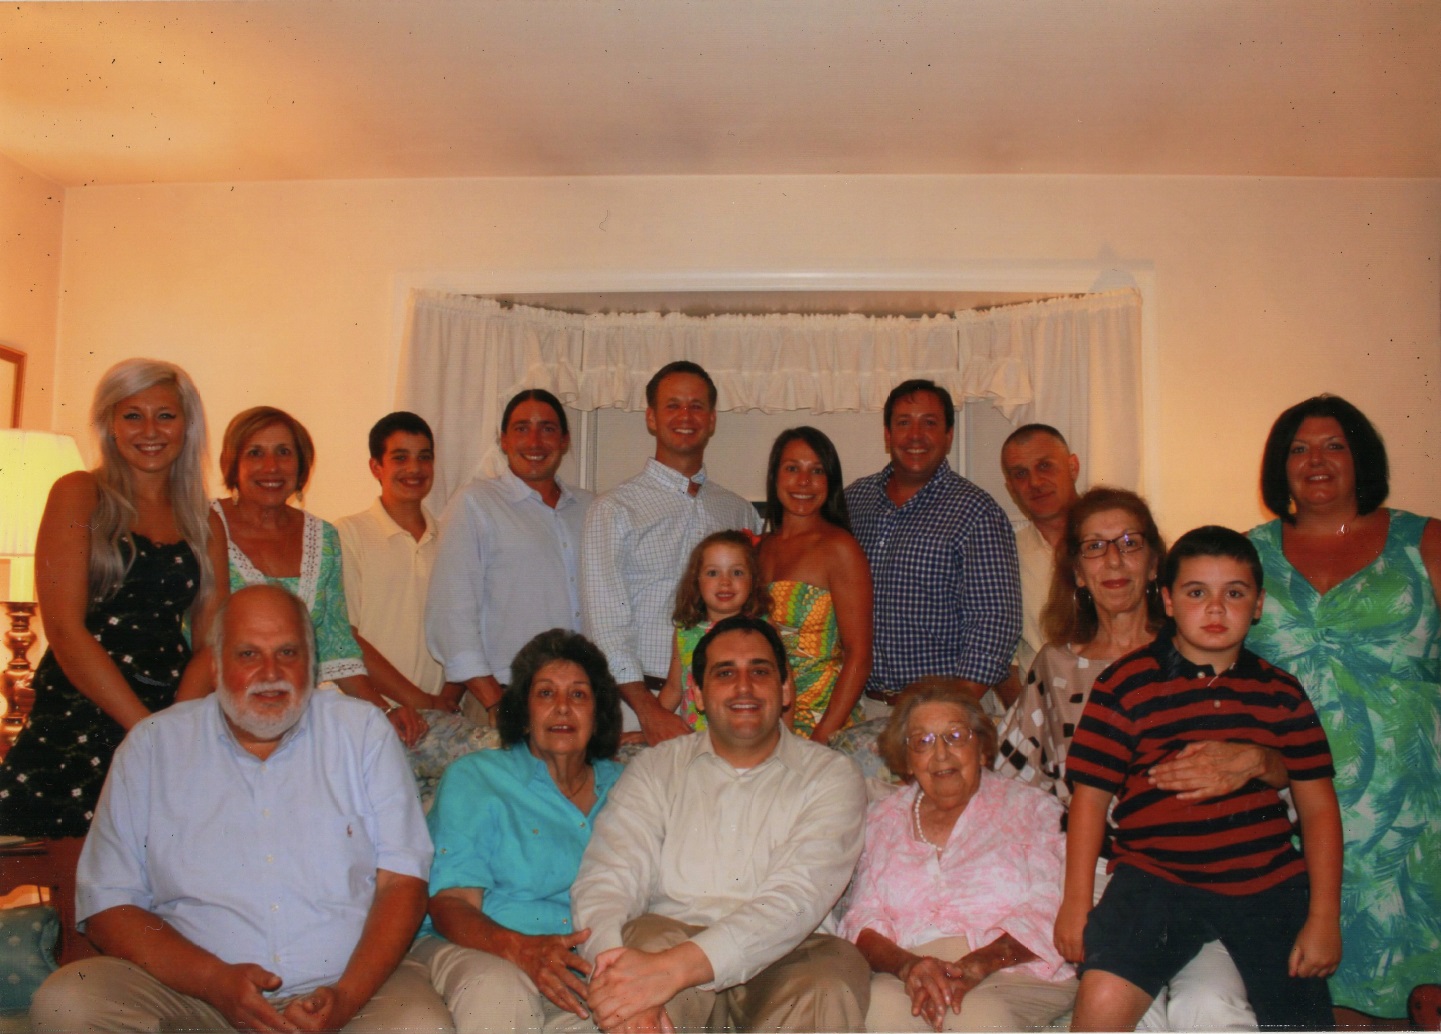   Chad Lupinacci, first row third from left, at a family gathering in 2012.  